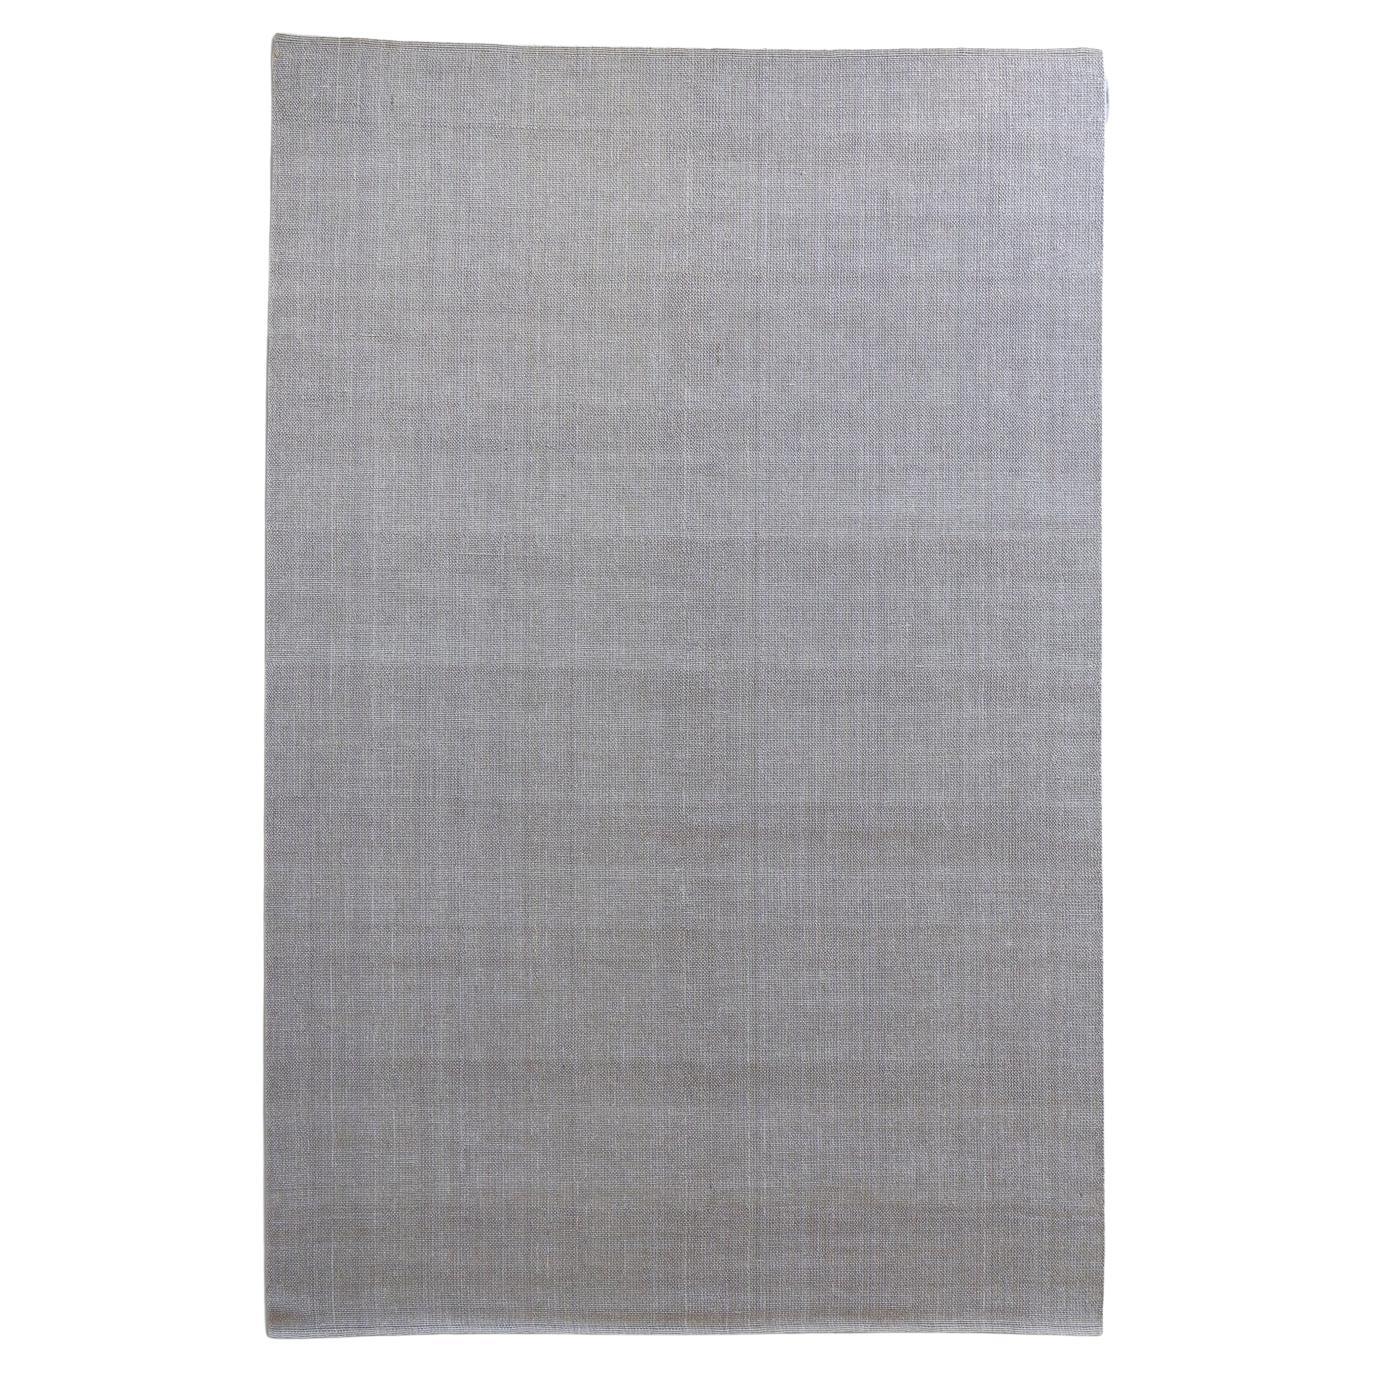 Contemporary Functional Design Grey Rug by Deanna Comellini In Stock 250x350 cm For Sale